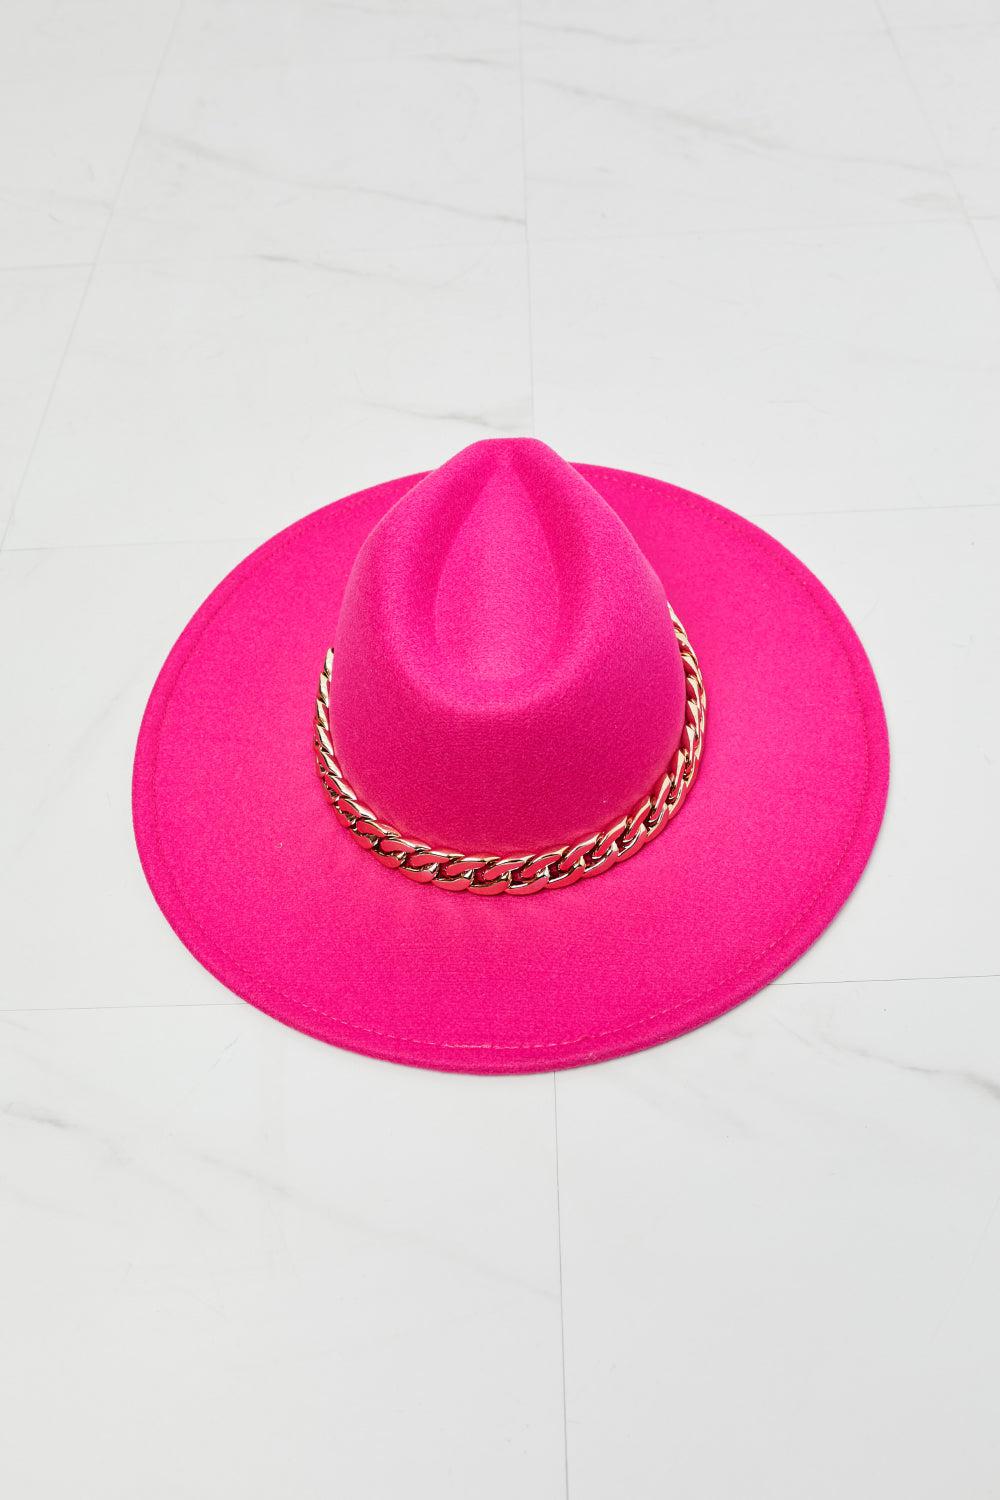 Fame Keep Your Promise Fedora Hat in Pink BLUE ZONE PLANET